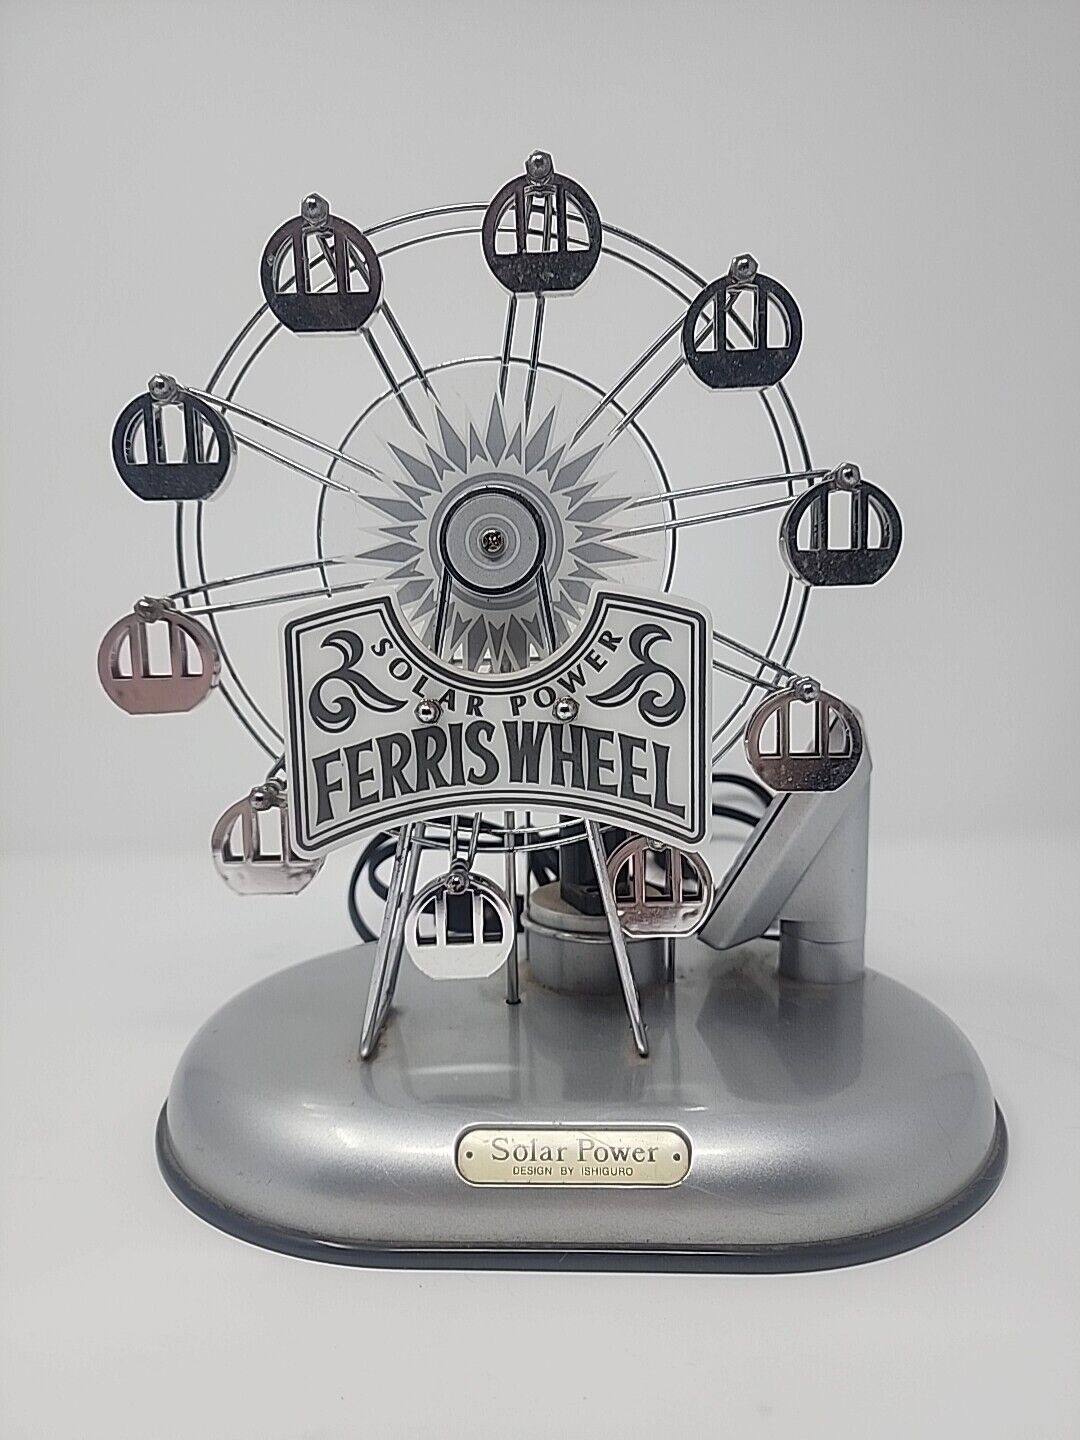 Electric Solar Power FERRIS WHEEL by Ishiguro Novelty Lamp WORKS See Video